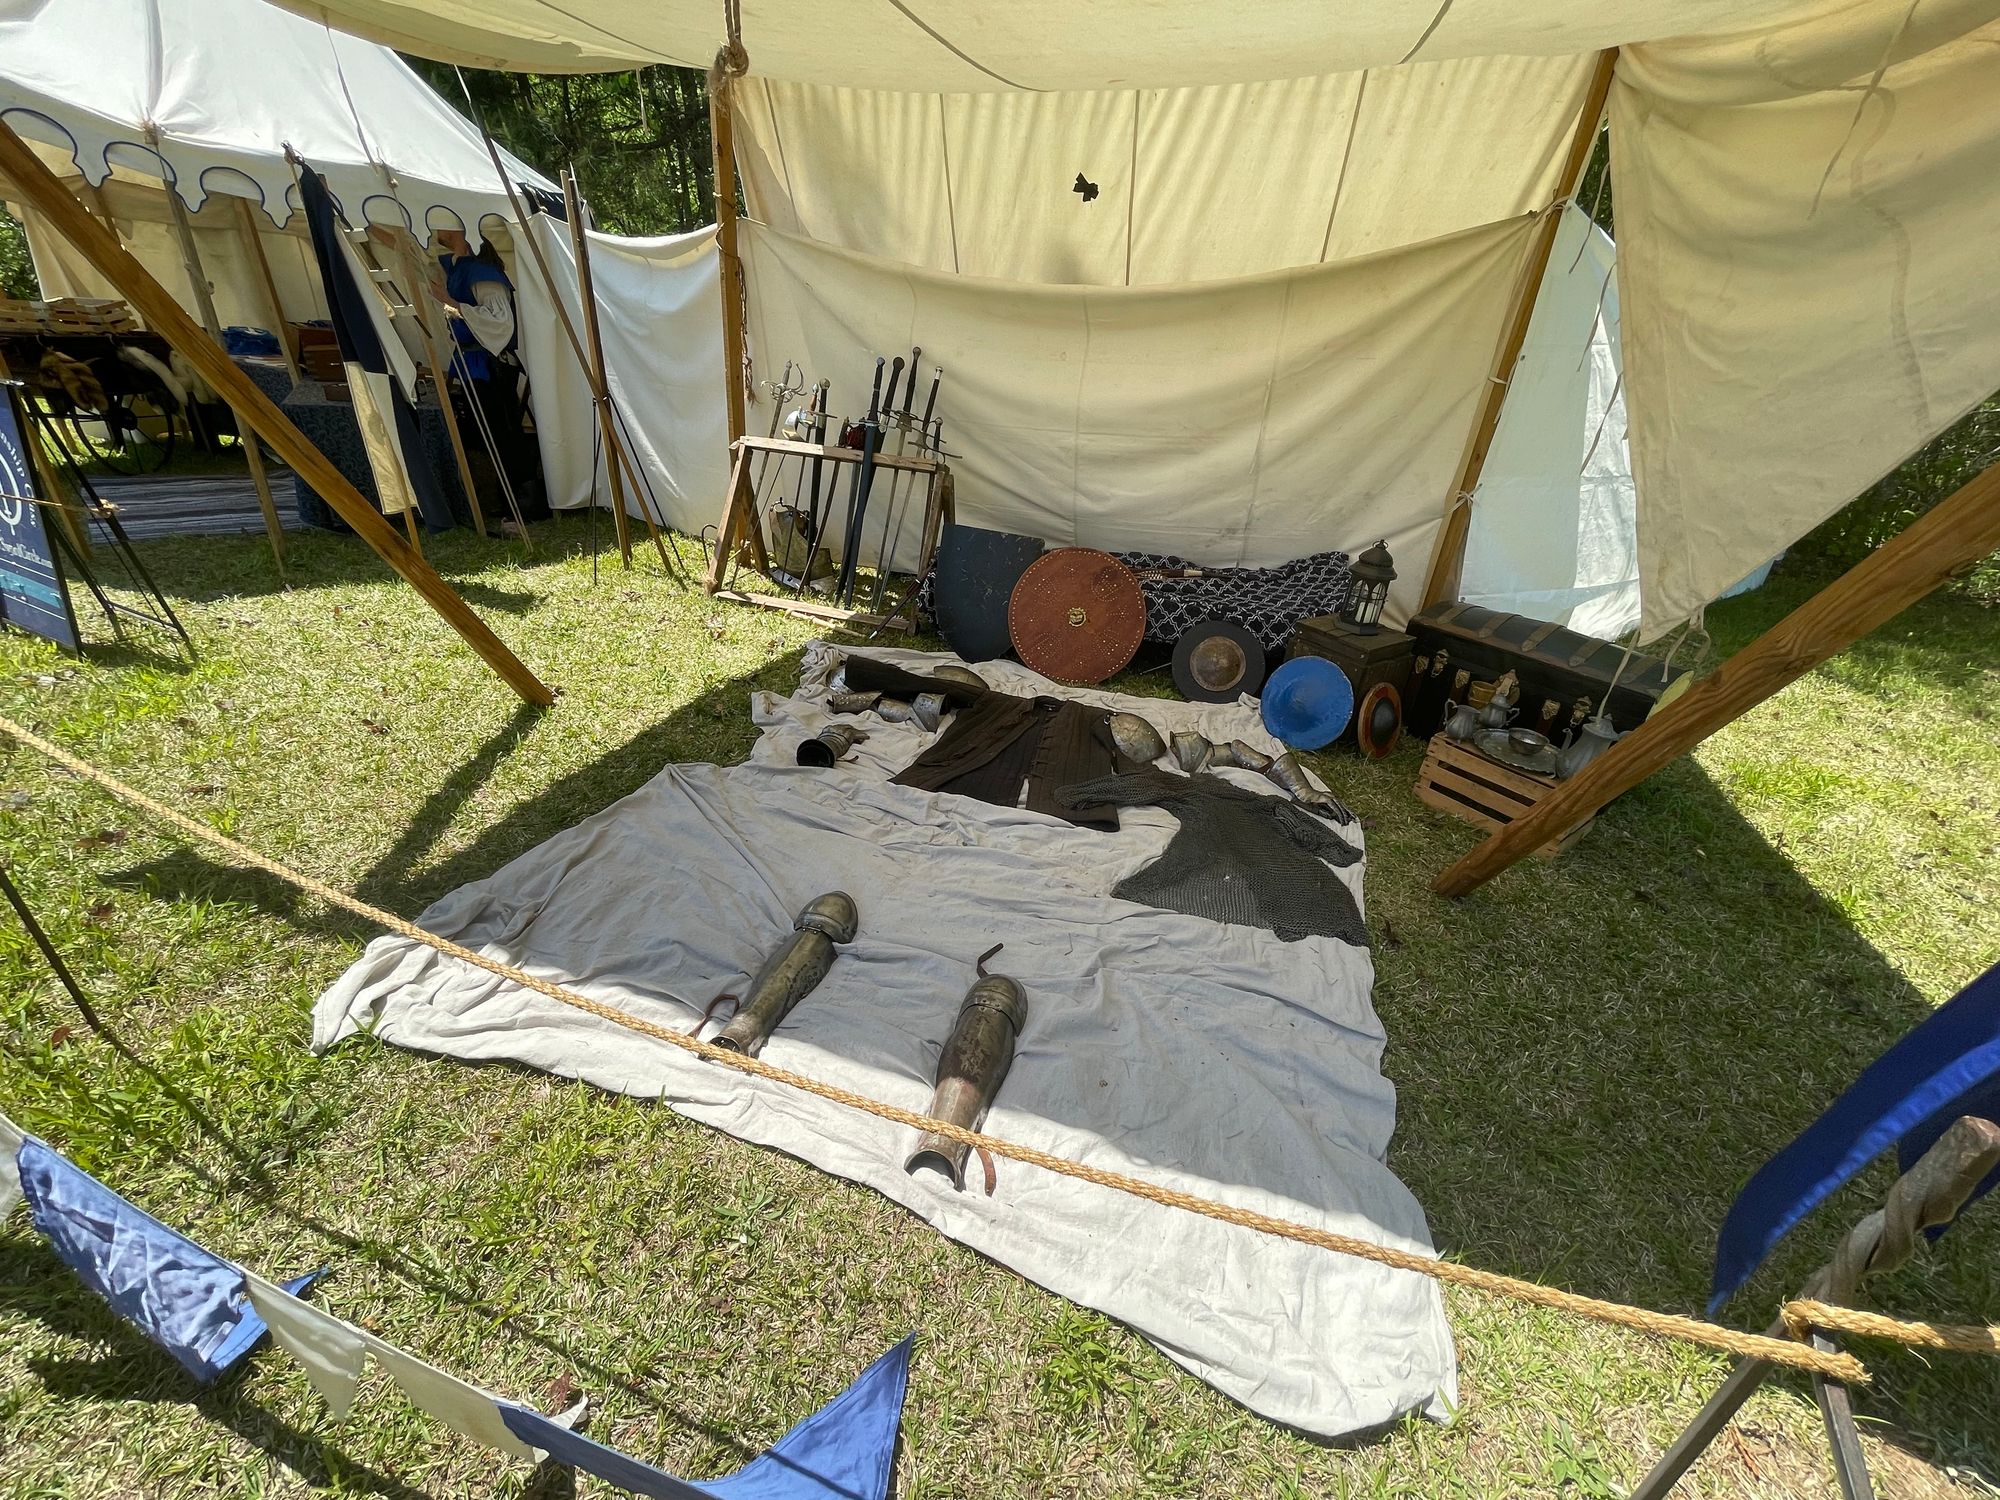 A set of armor laying out on a blanket. Swords and shields are displayed behind.